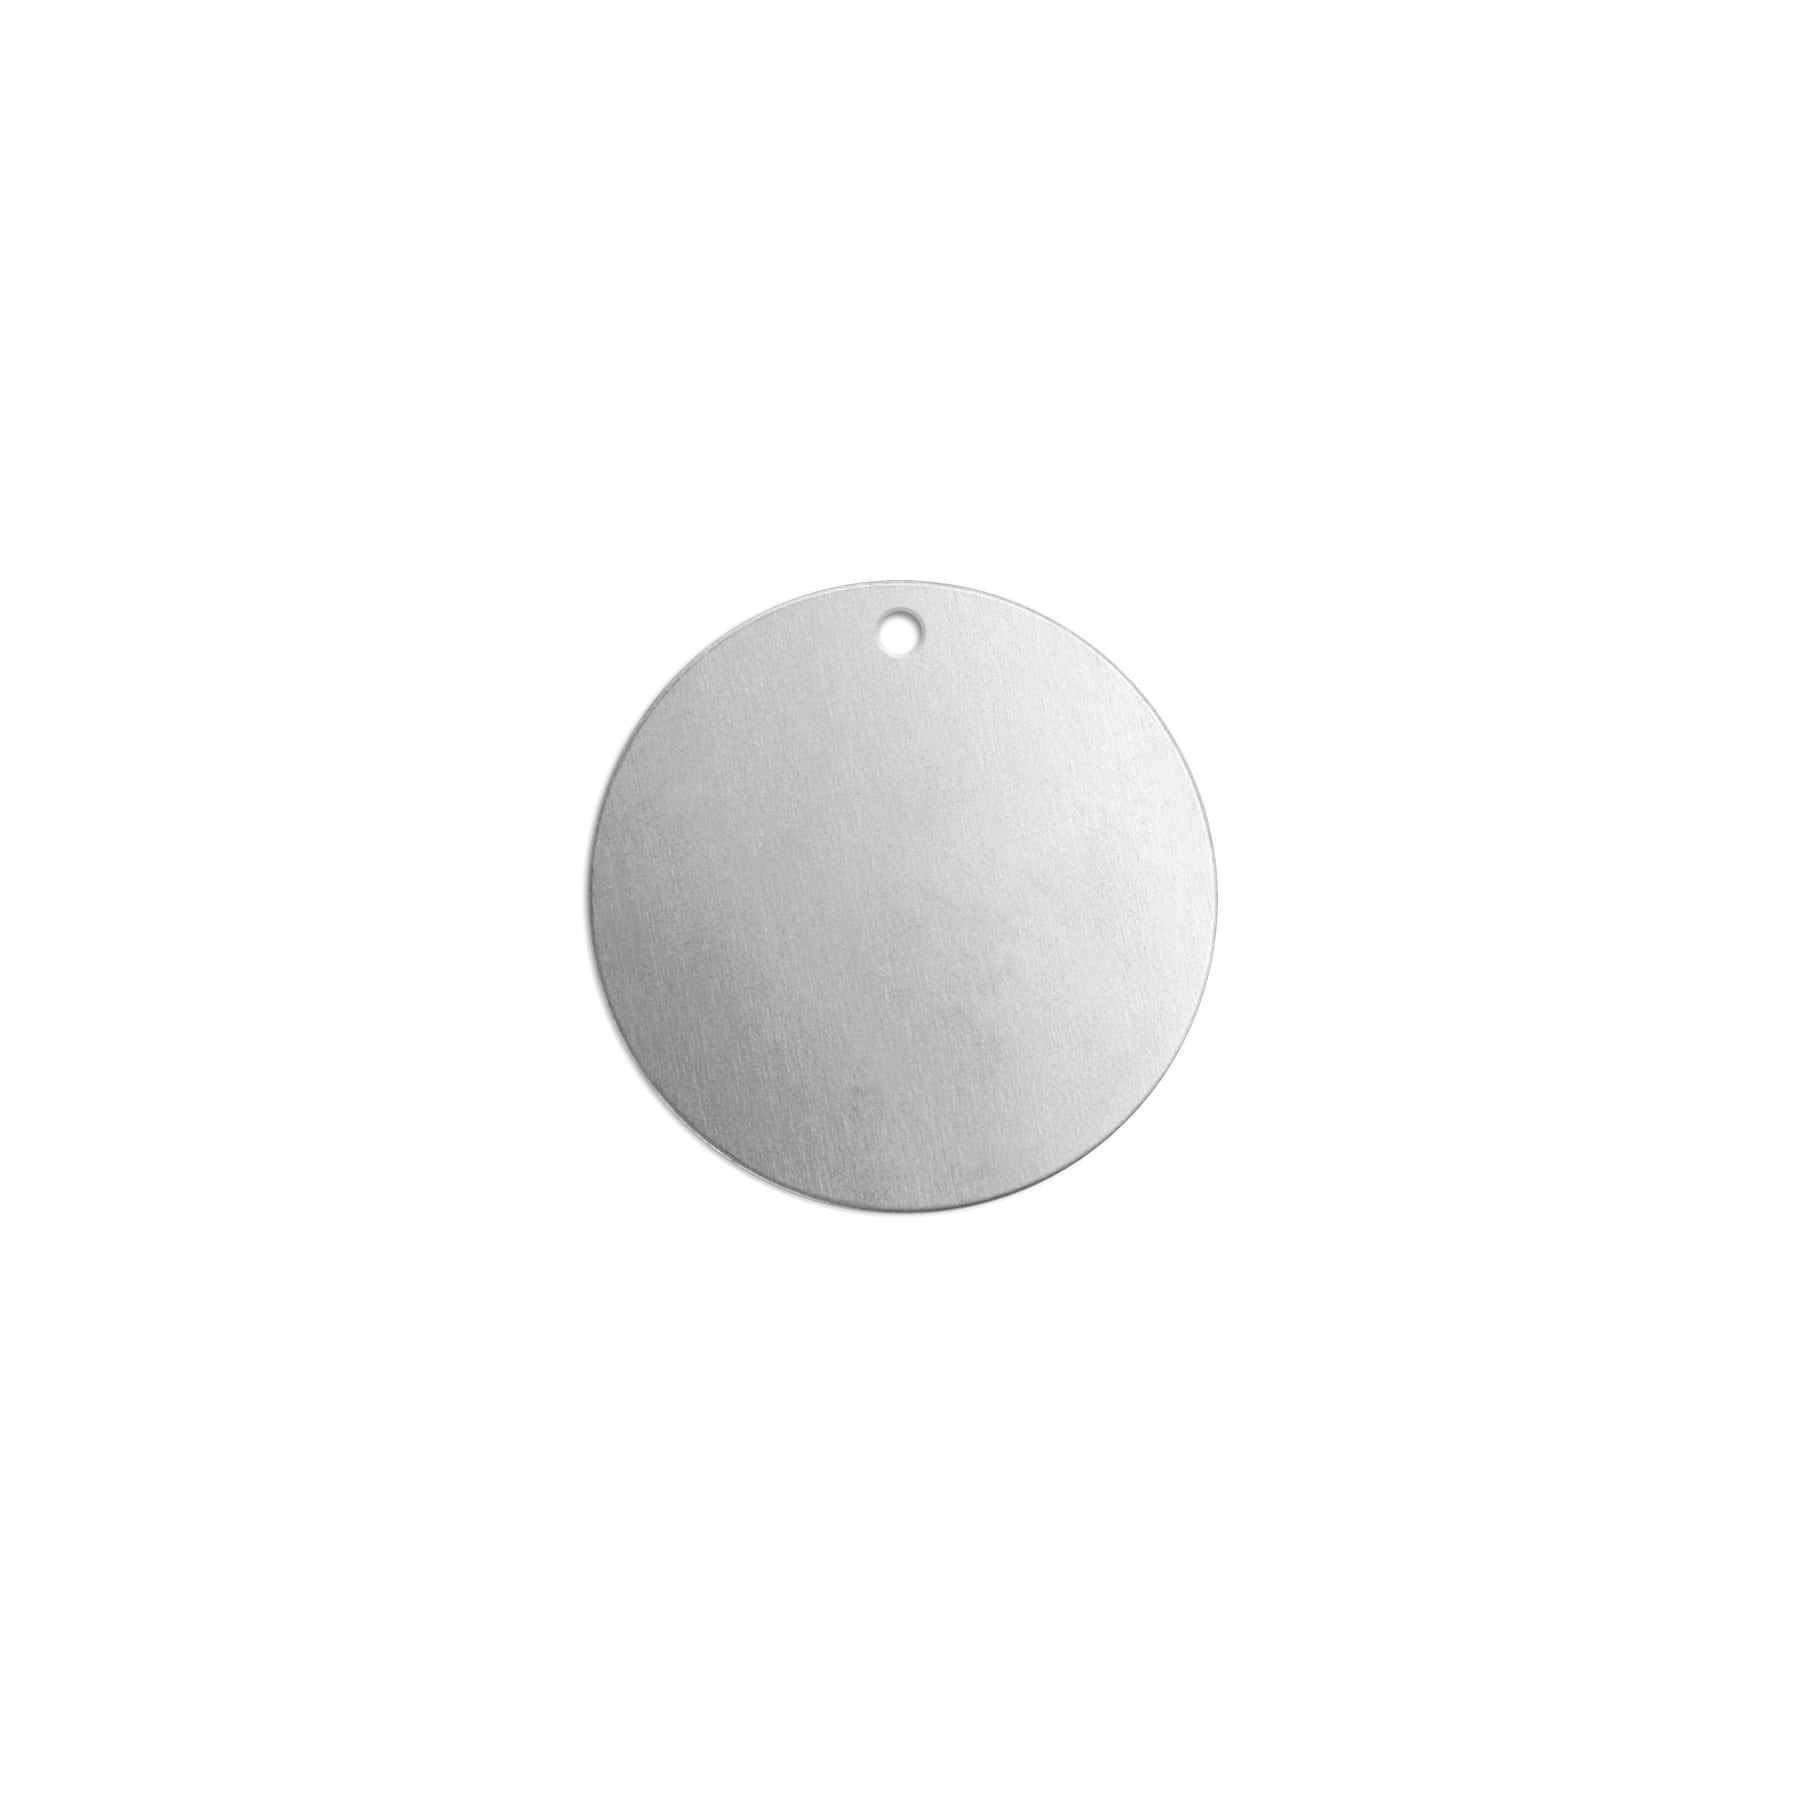 Metal Stamping Blanks, 1 Inch round with Hole Aluminum 0.02 Inch